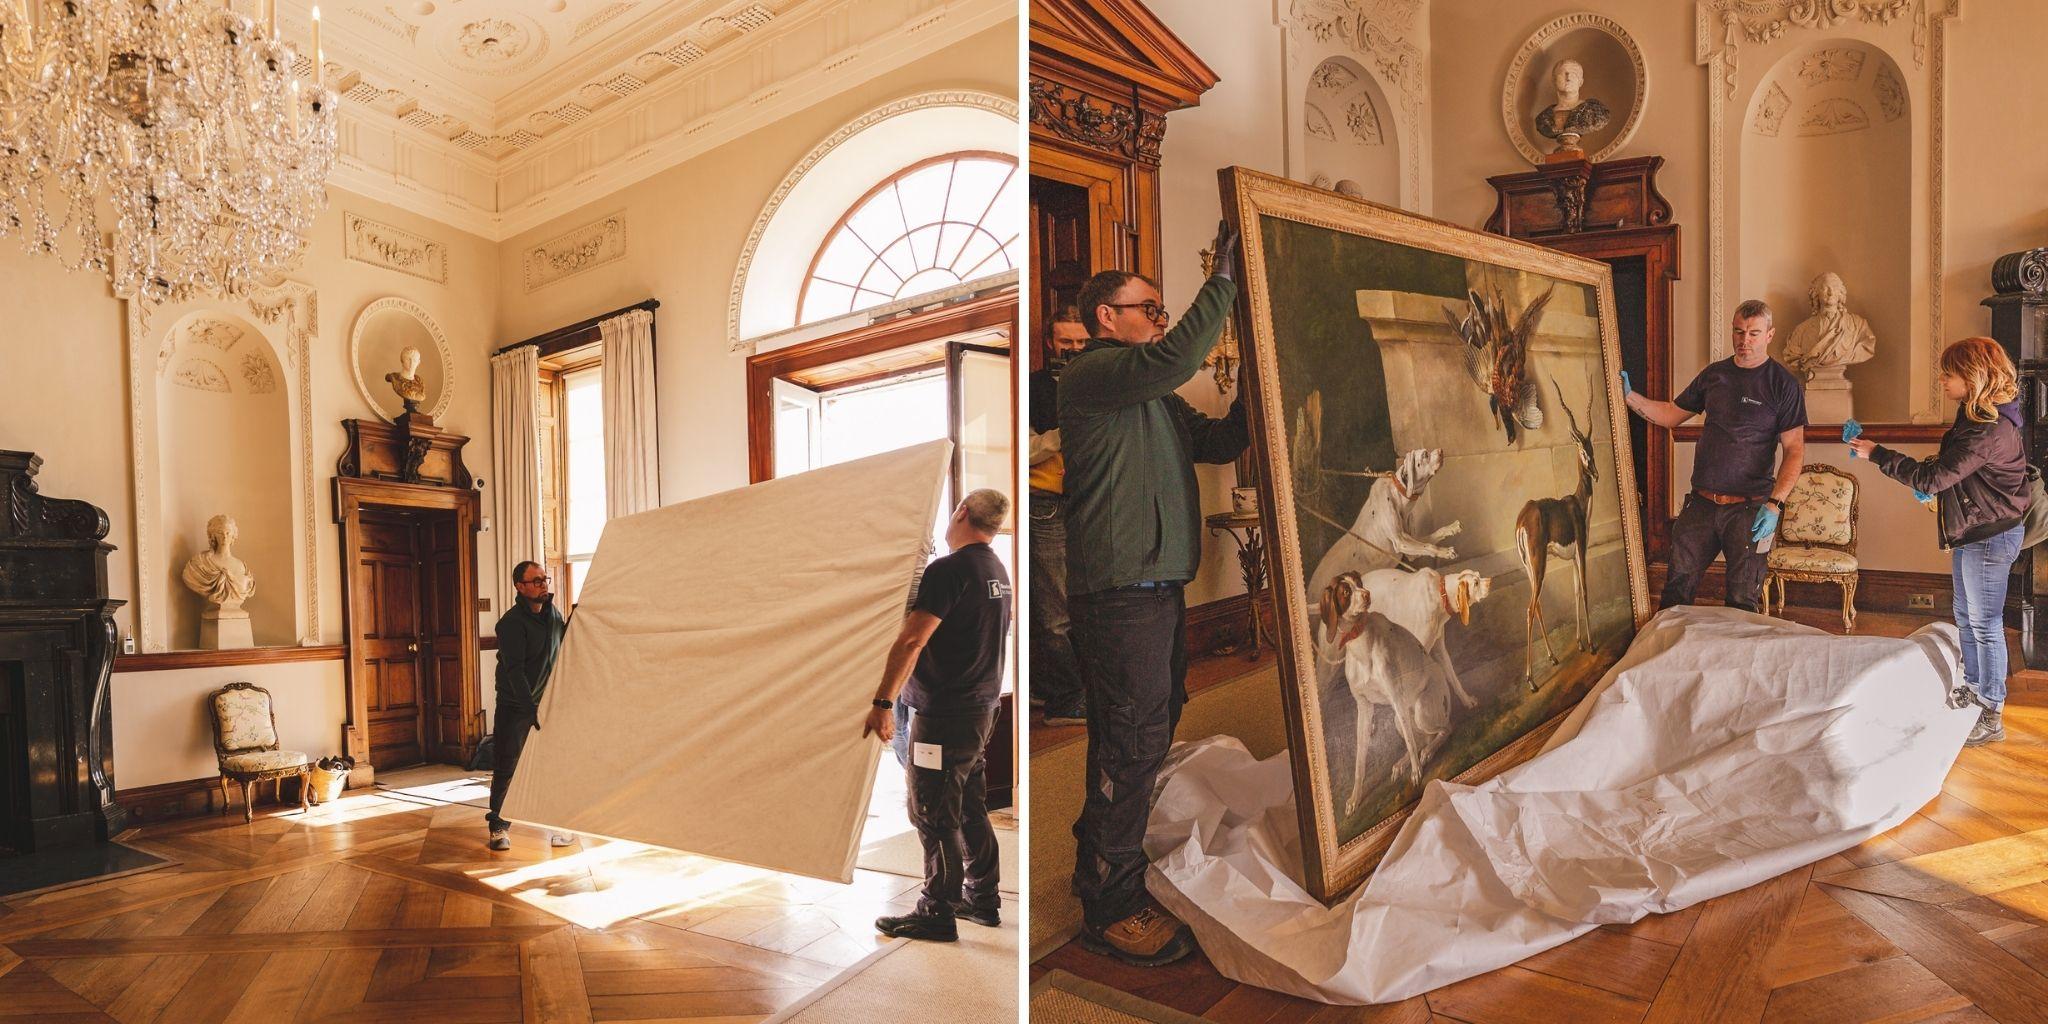 Oudry painting in transit